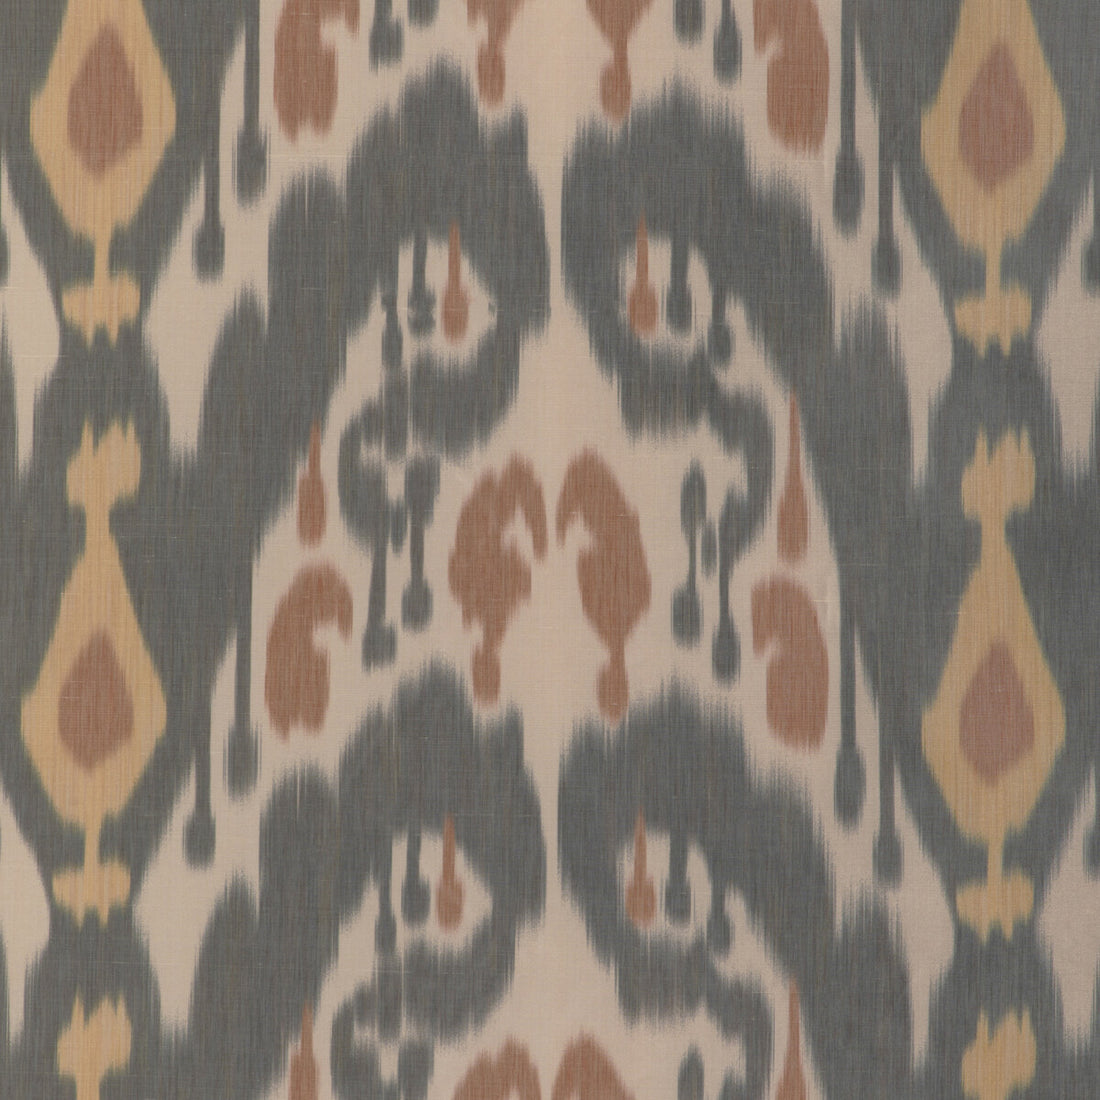 Bukara Warp Print fabric in ebony color - pattern 8023146.84.0 - by Brunschwig &amp; Fils in the Vienne Silks collection